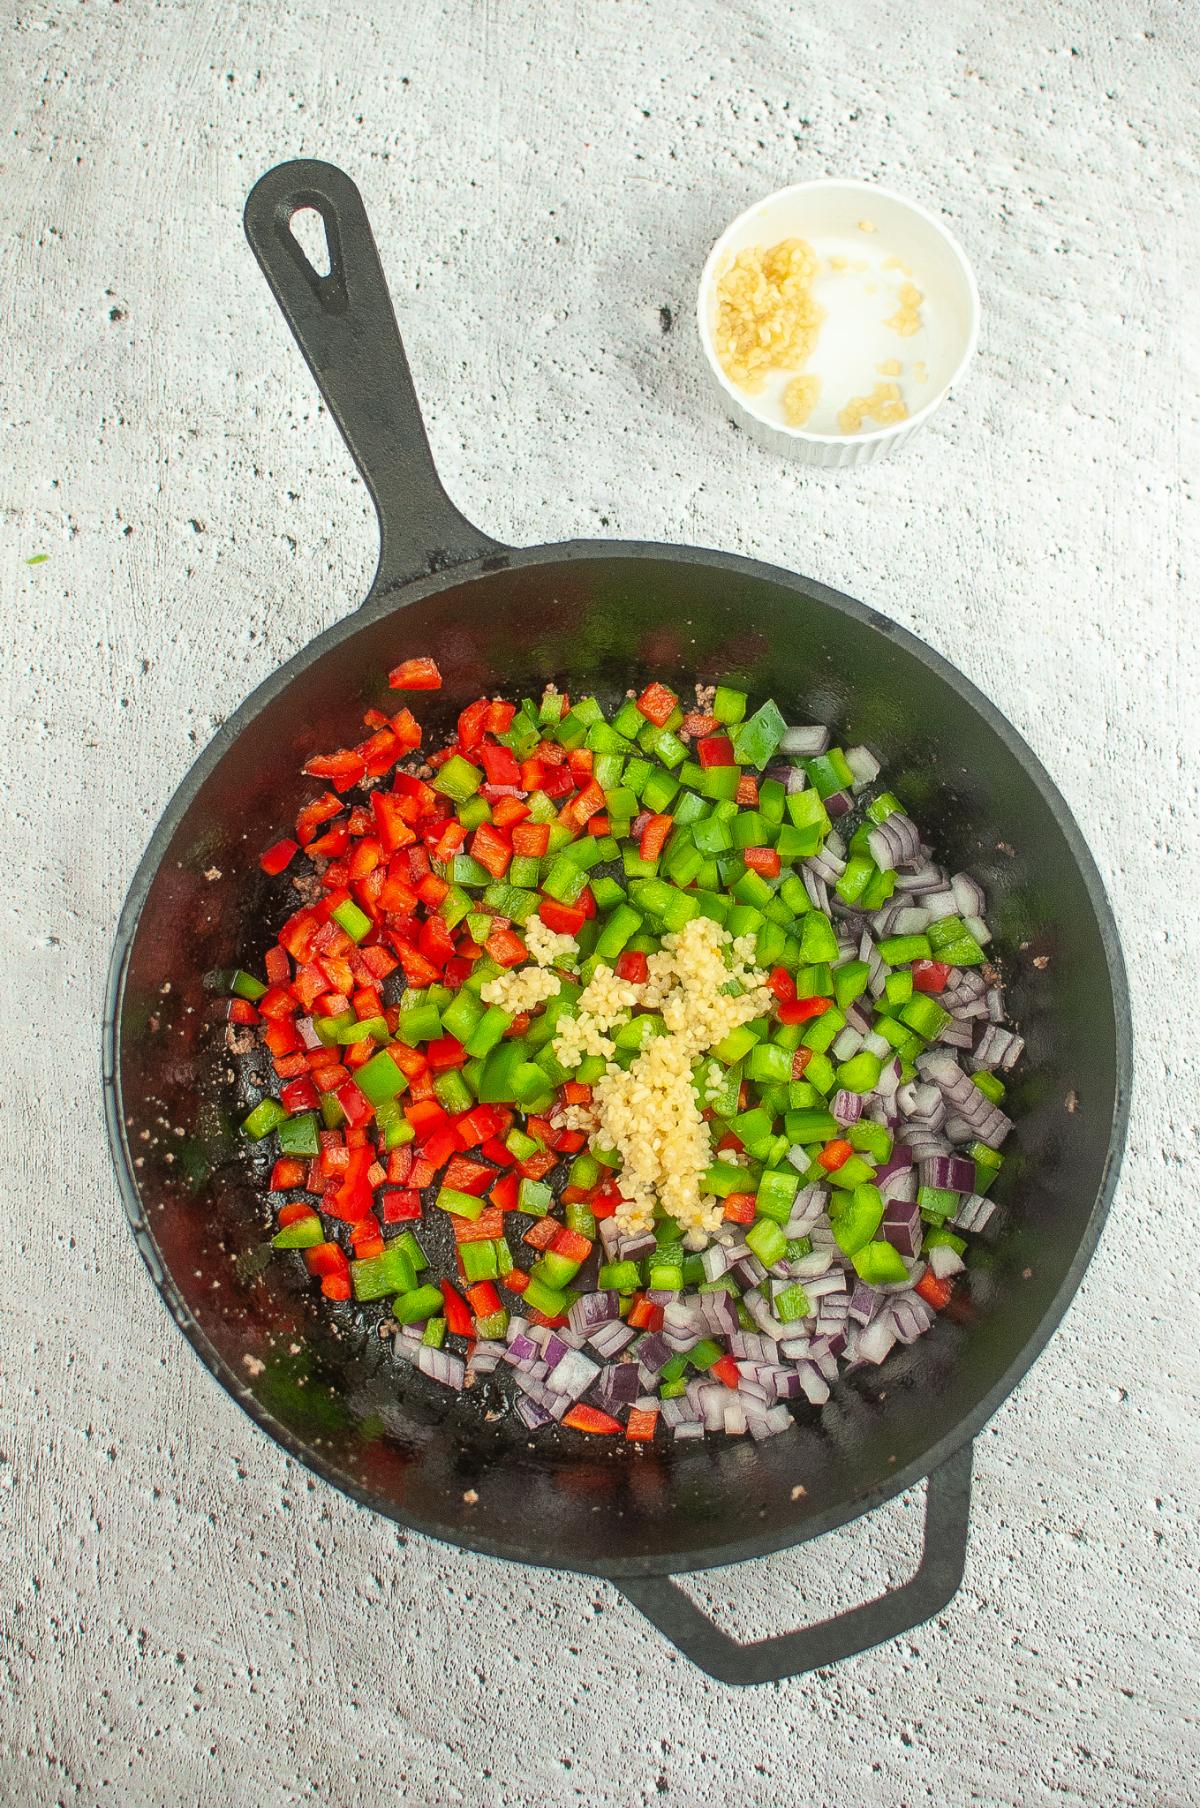 Vegetables cooking in a dutch oven.